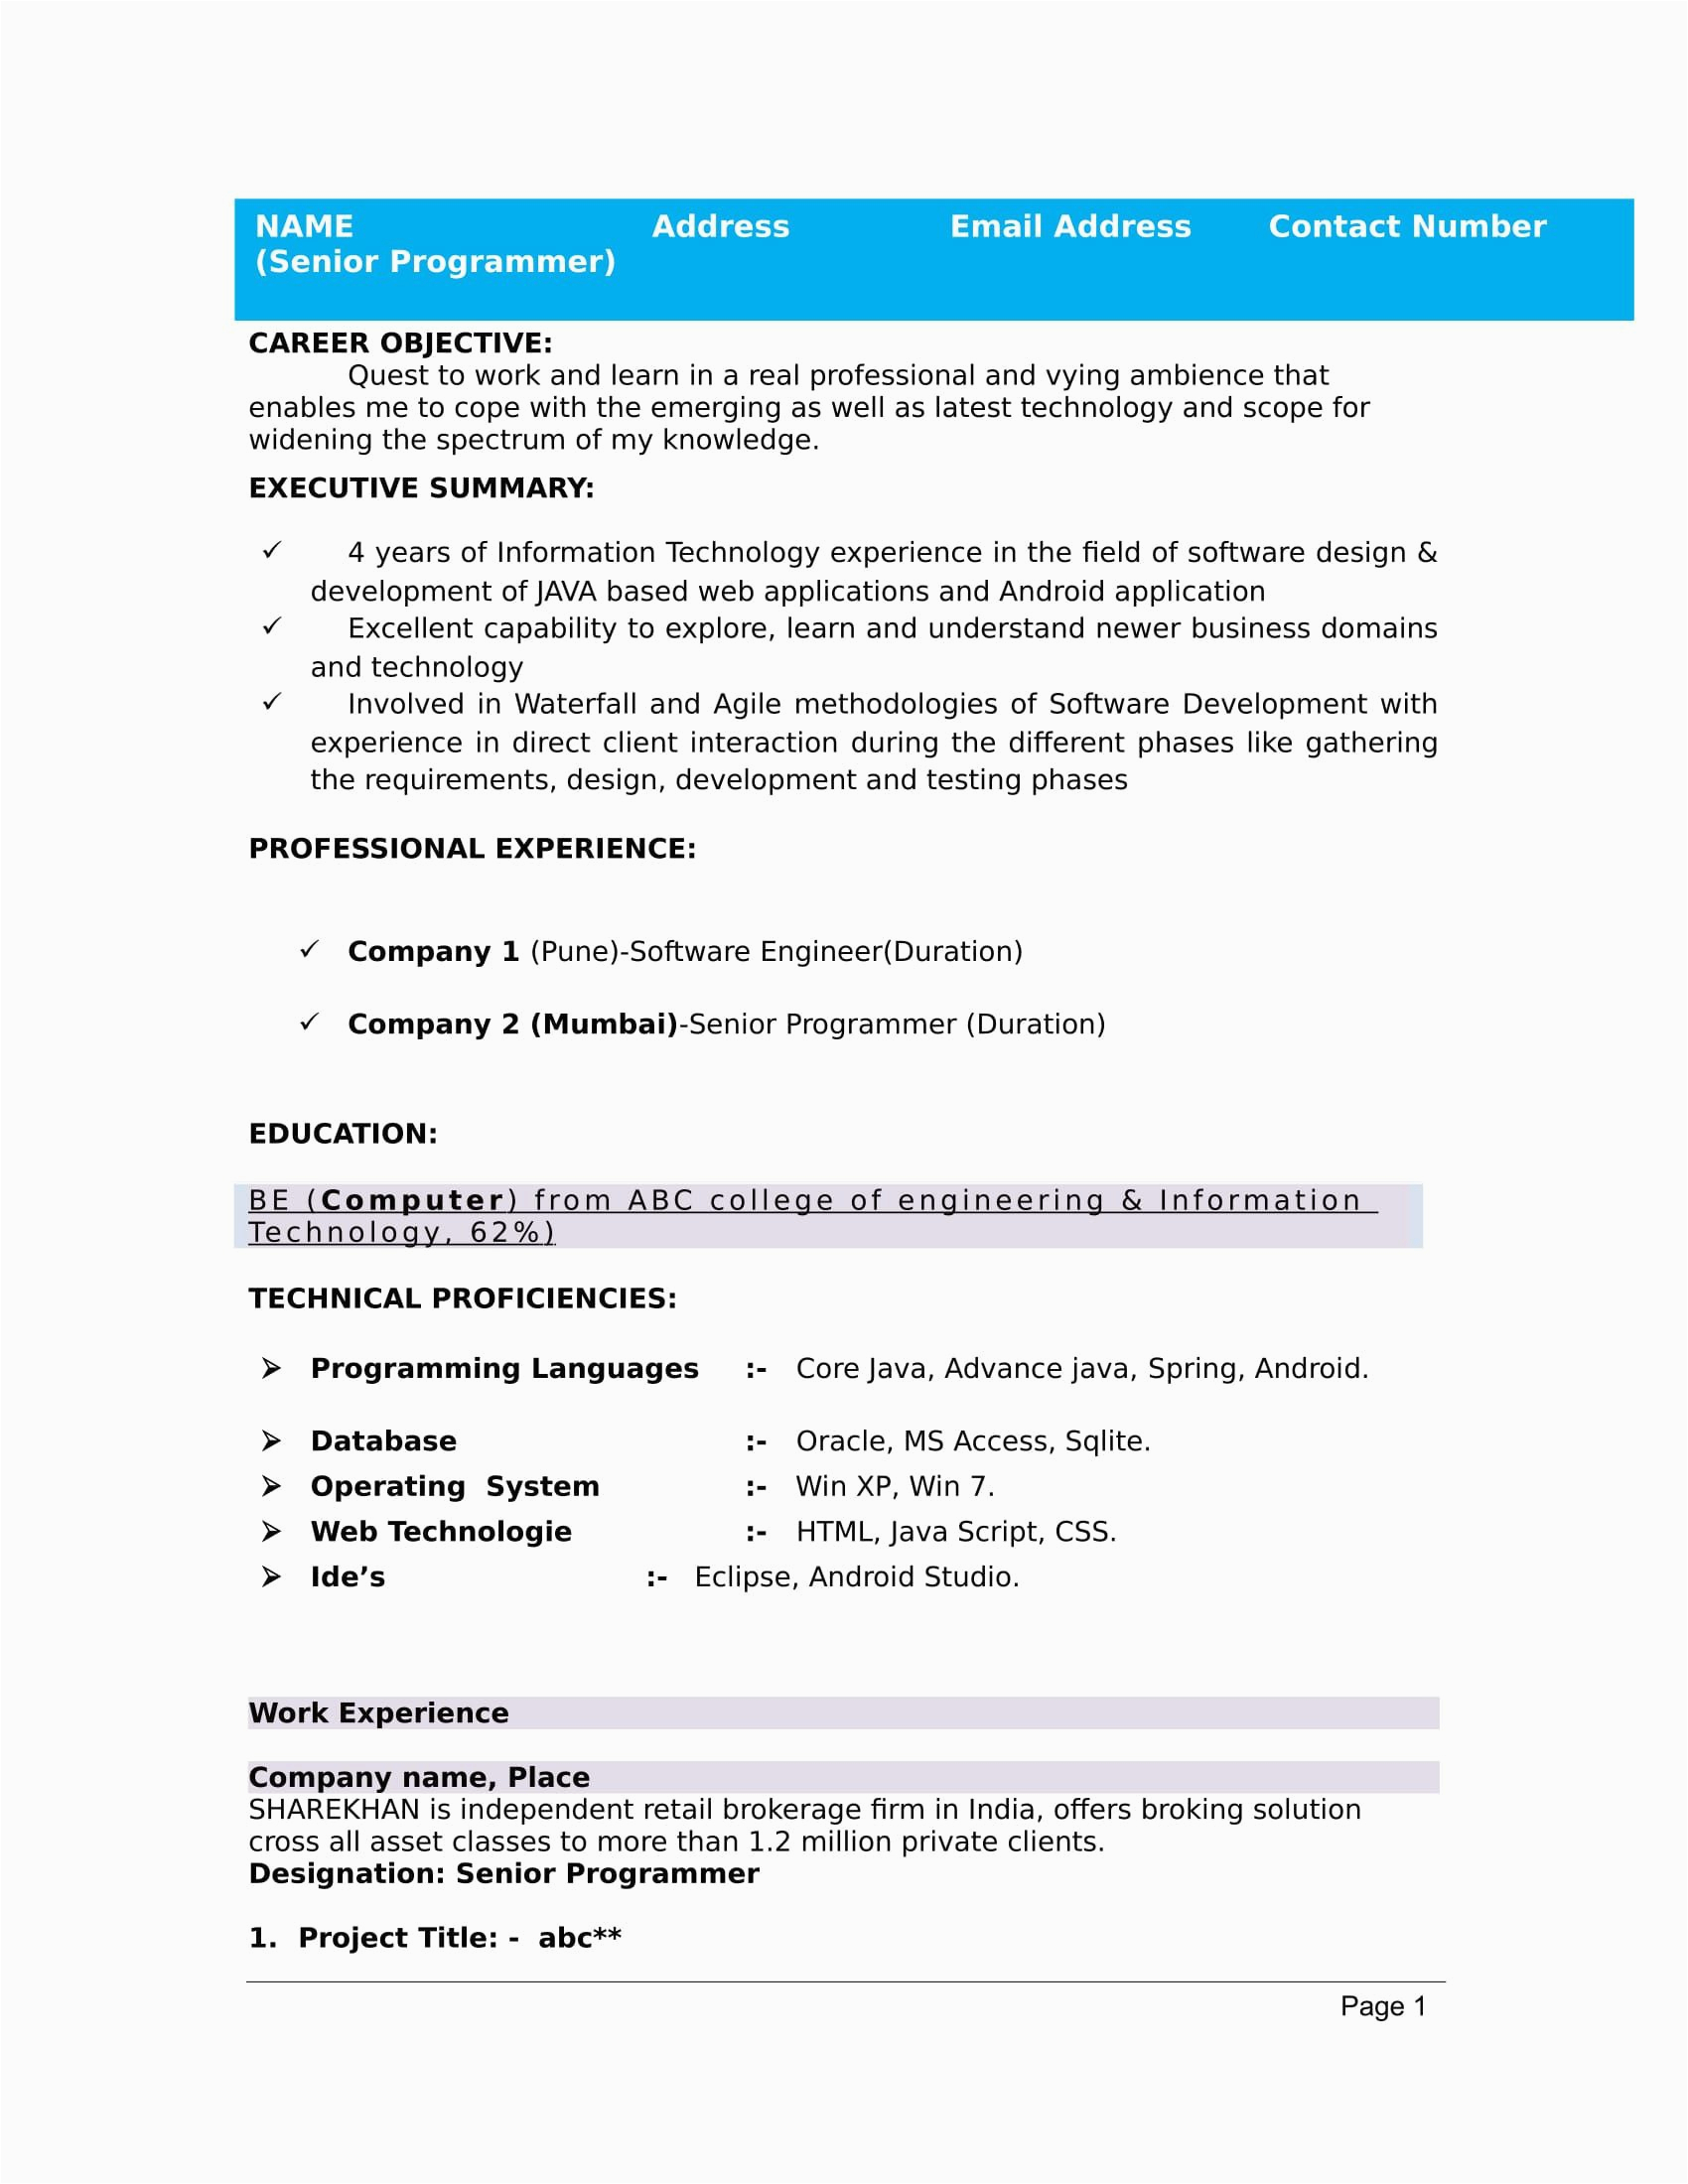 Sample Resume format for Freshers Engineers Aeronautical Engineer Fresher Resume format Best Resume